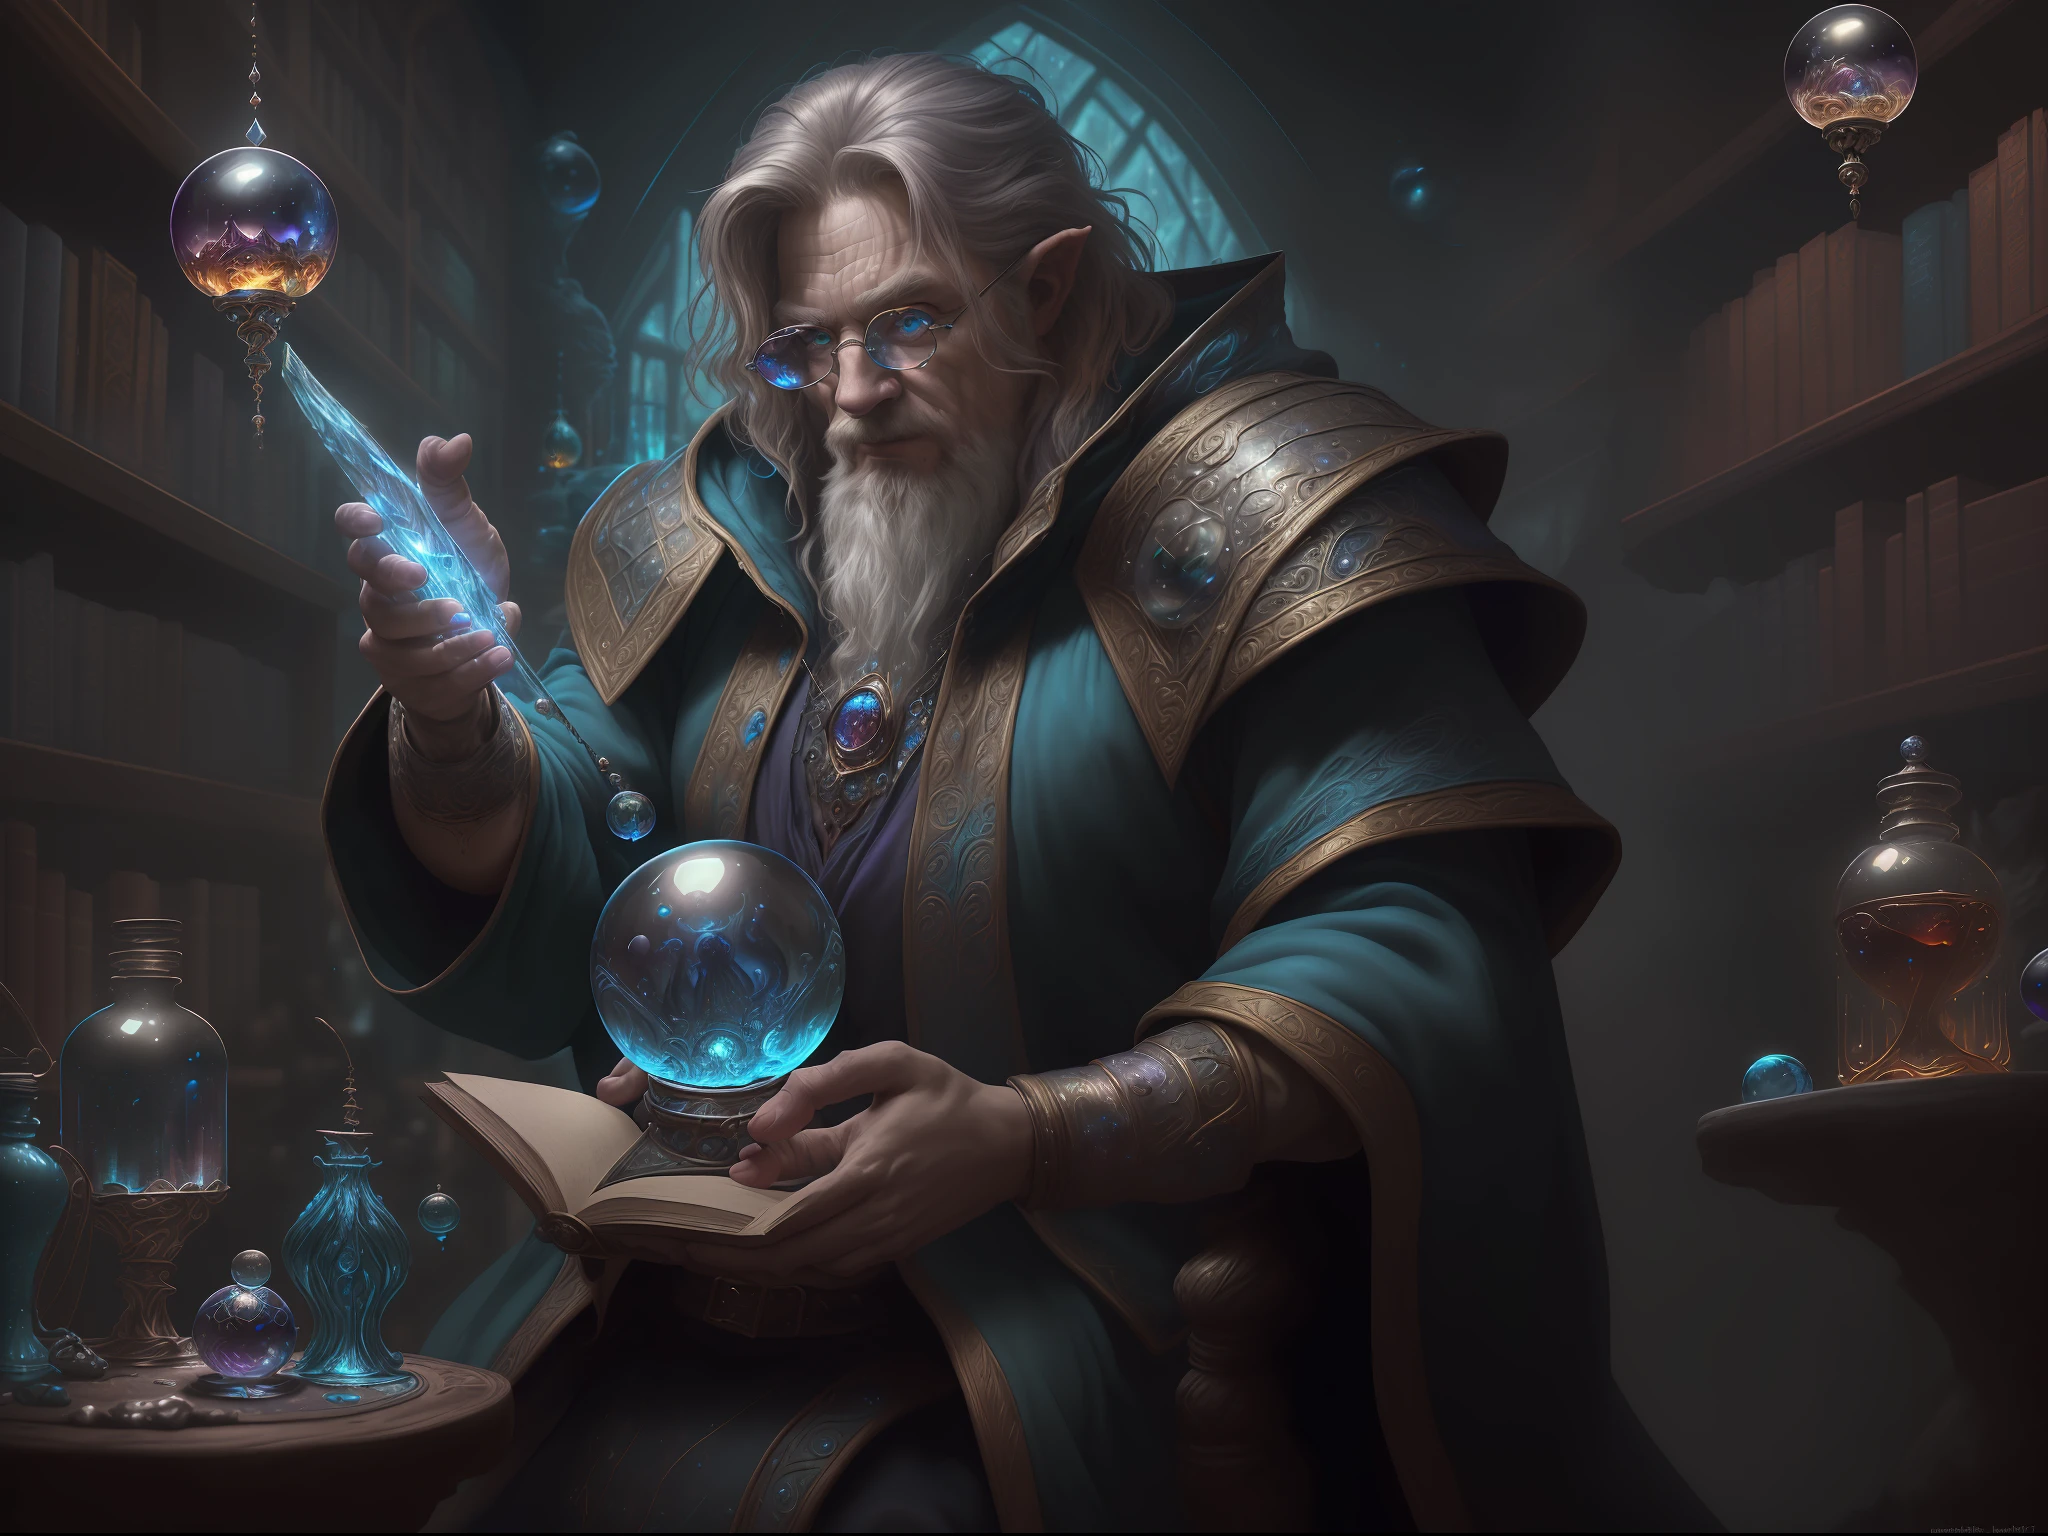 high details, best quality, 8k, [ultra detailed], masterpiece, best quality, (extremely detailed), dynamic angle, ultra wide shot, photorealistic, RAW, fantasy art, dnd art, fantasy art, realistic art, a wide angle landscape view wallpaper of a wizard (intense details, Masterpiece, best quality: 1.5) looking into his crystal ball (intense details, Masterpiece, best quality: 1.5), casting a spell in his magical laboratory, human male wizard, fantasy wizard (intense details, Masterpiece, best quality: 1.5), D&D wizard, middle aged man (intense details, Masterpiece, best quality: 1.5), dynamic hair, dynamic eyes, wearing magical robe (intense details, Masterpiece, best quality: 1.5), dynamic colors, ultra detailed face (intense details, Masterpiece, best quality: 1.5), manipulating blue magical energy, in his laboratory (intense details, Masterpiece, best quality: 1.5), many magical tomes, magical library (intense details, Masterpiece, best quality: 1.5),  many magical vials, ultra wide angle from a medium distance,